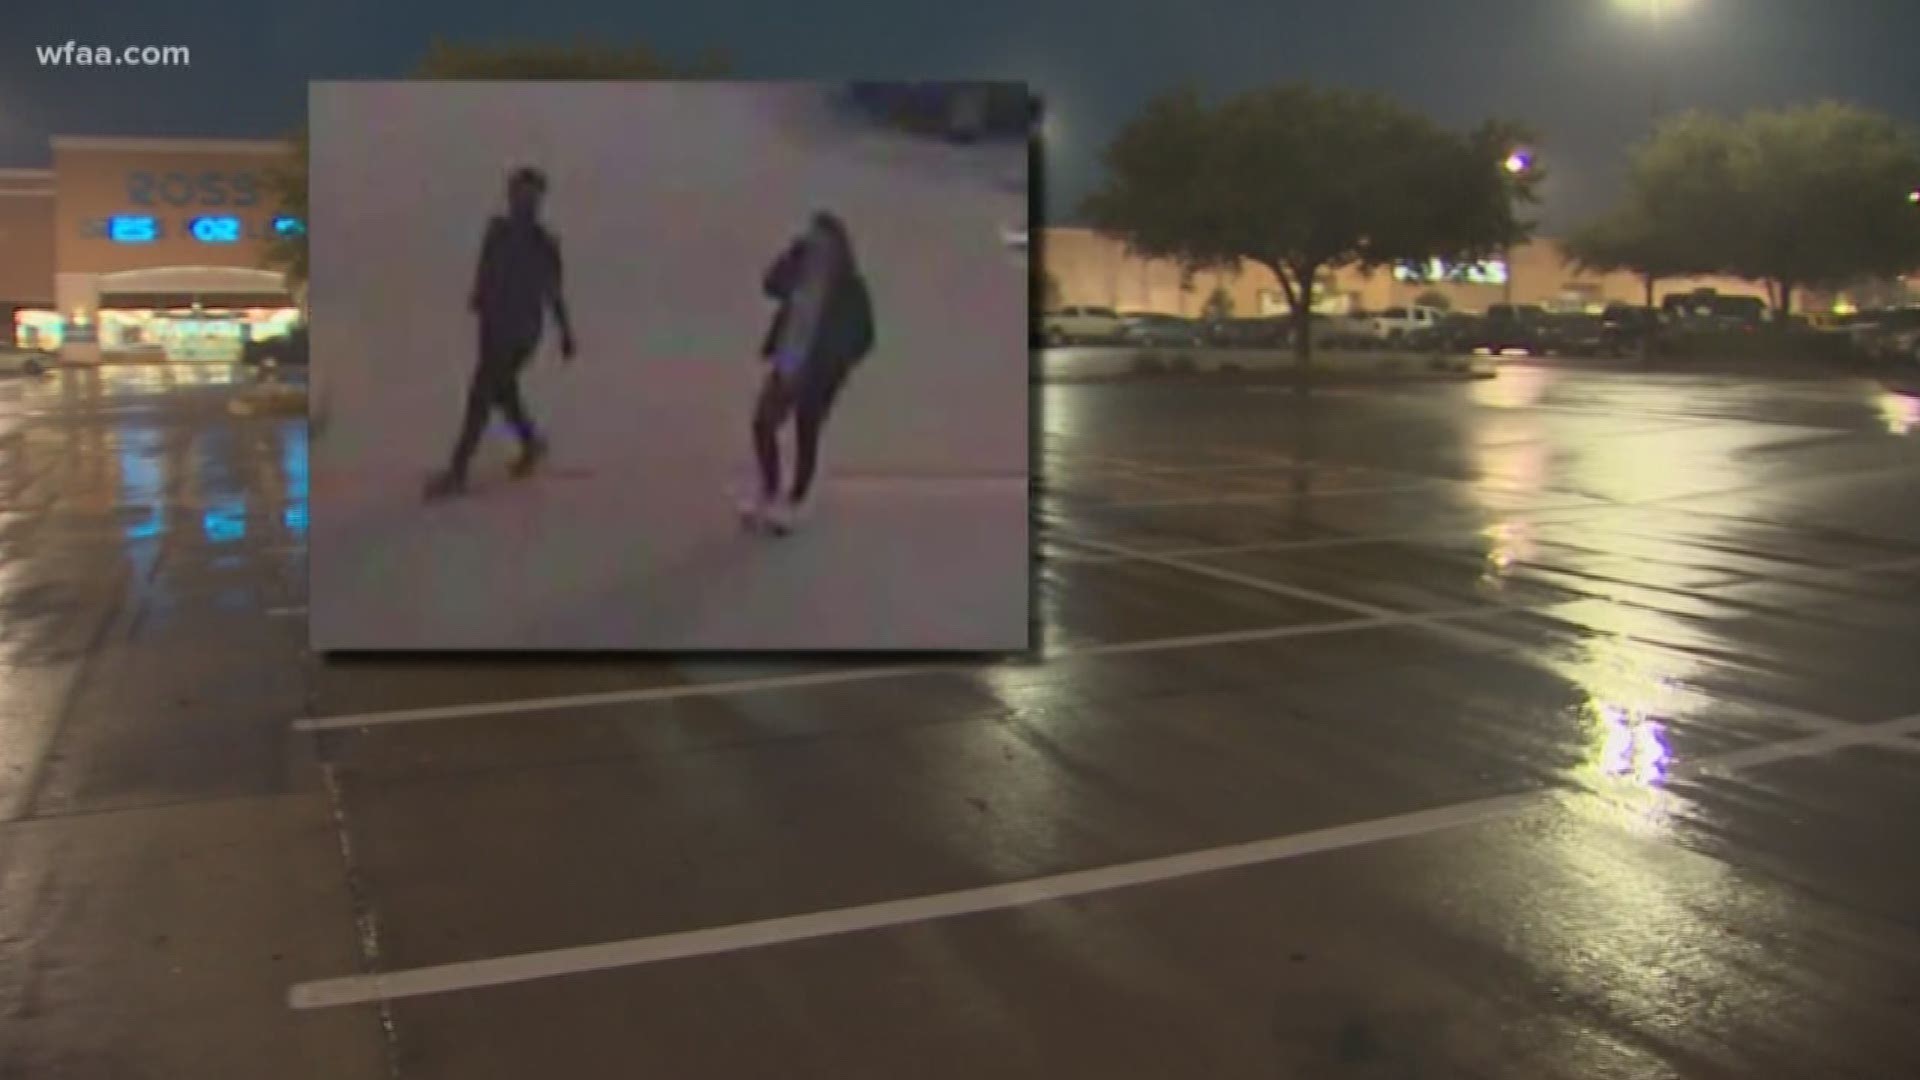 Burleson police are investigating an aggravated assault and robbery at a shopping complex on Wednesday where a woman in her 70s was tased by a stun-gun and robbed.